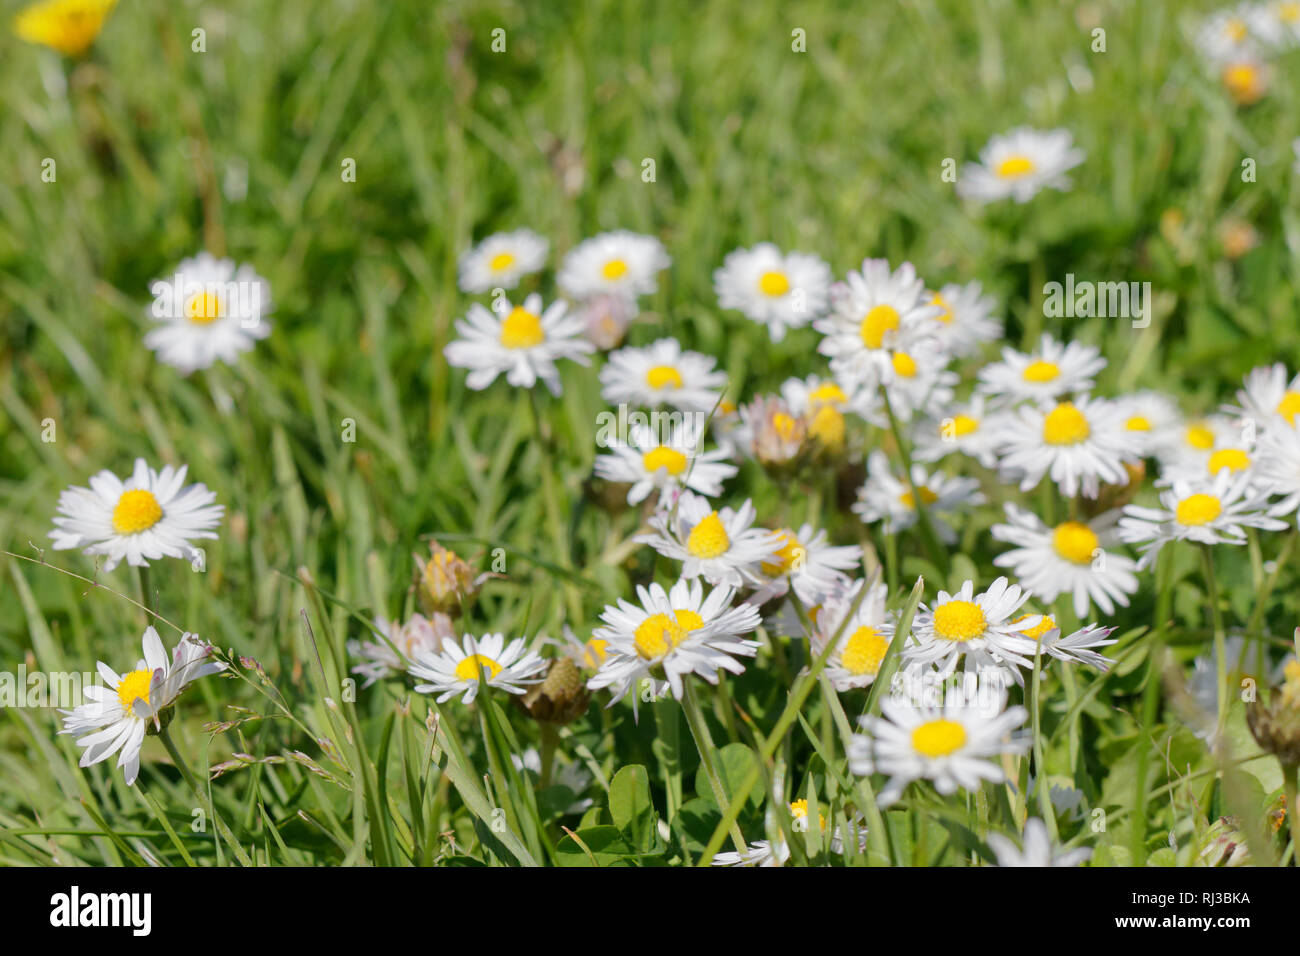 Daisies, Buttercups and Dandelions Stock Photo